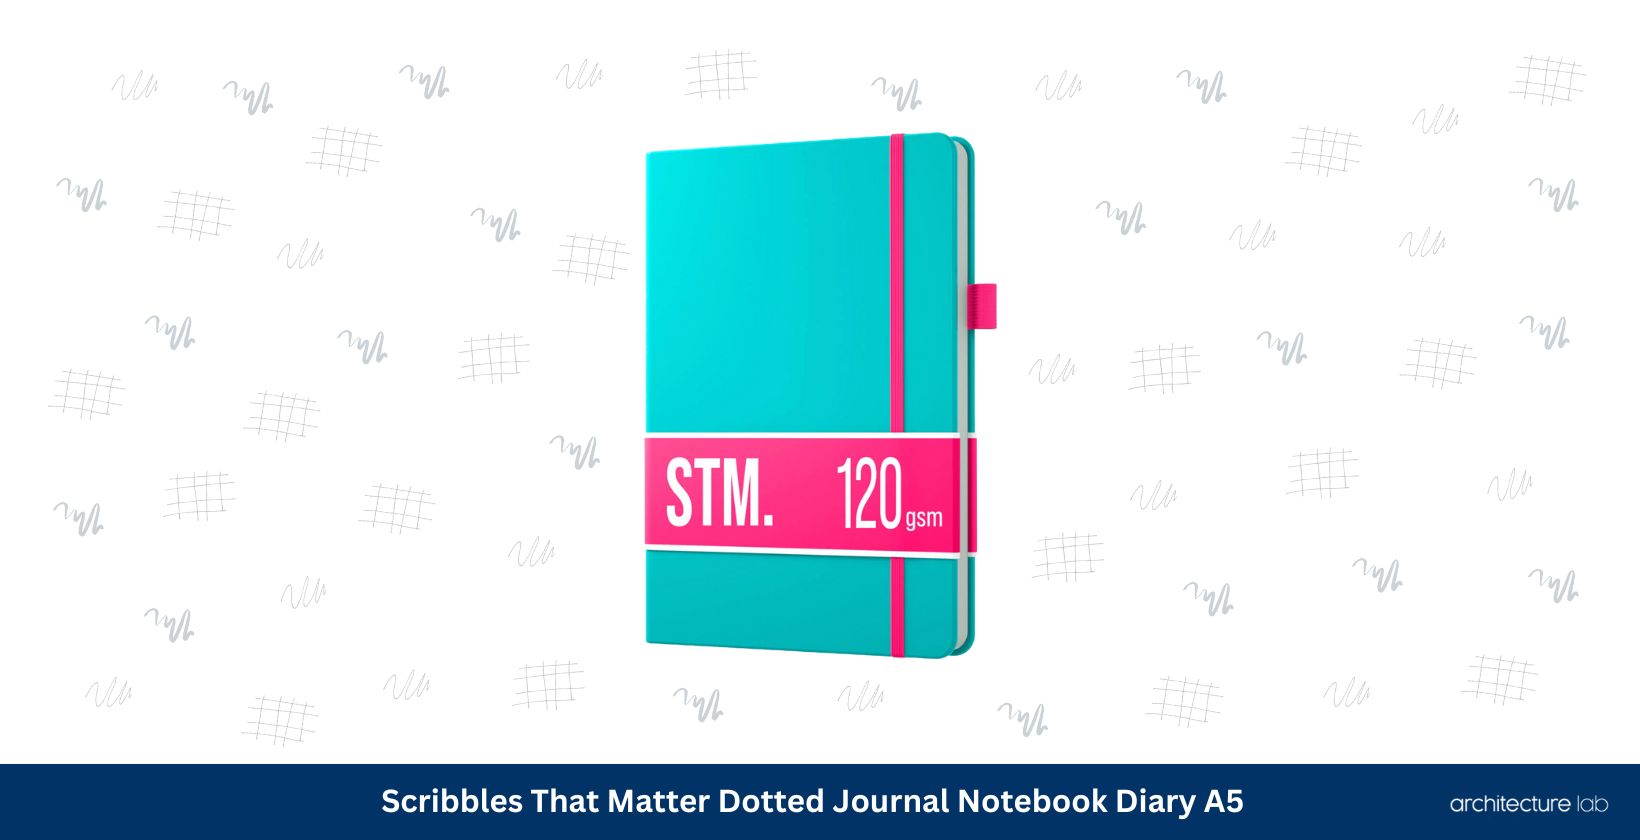 Scribbles that matter dotted journal notebook diary a5 1